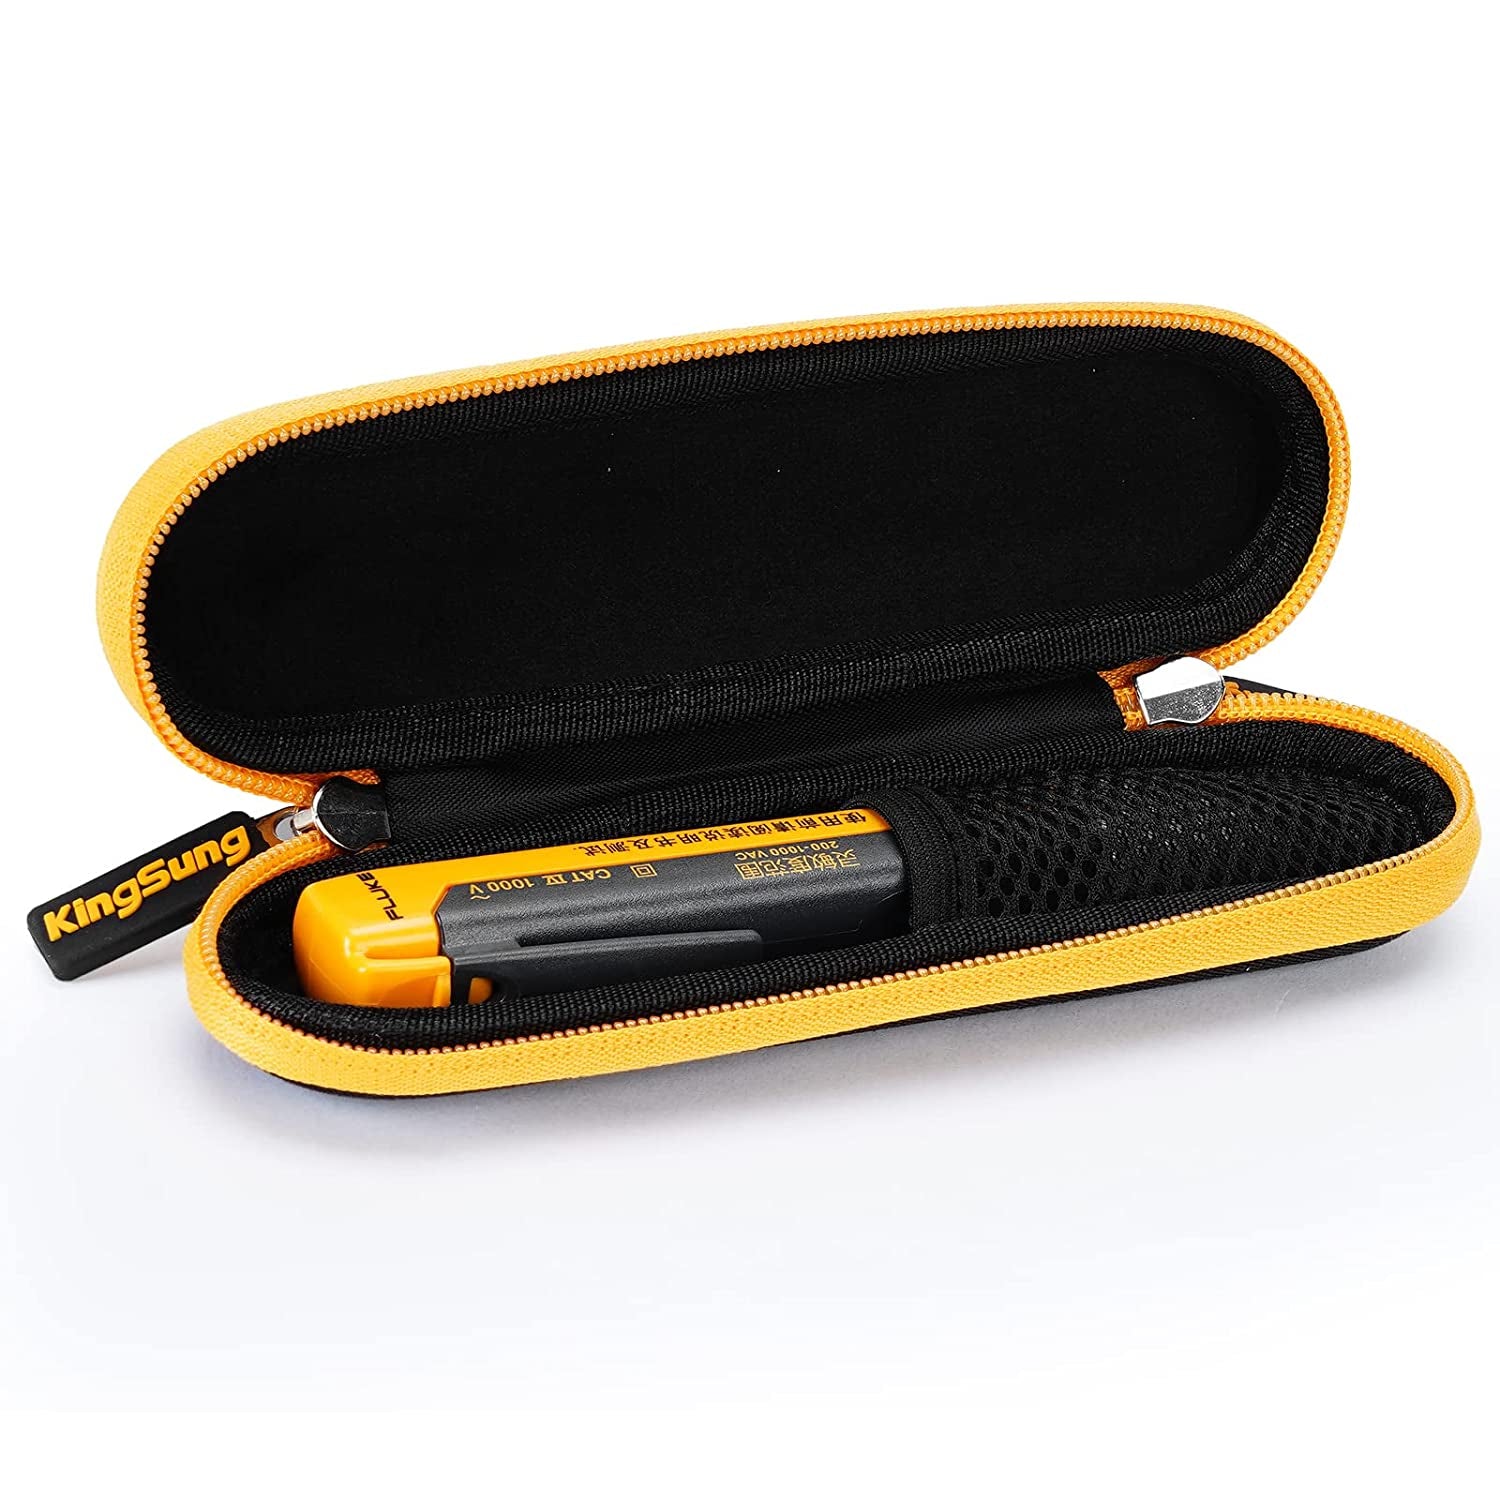 Kingsung Protective Hard Case for Fluke 1AC/1LAC/2AC/LVD2/FLK2AC, KAIWEETS HT-100 and Klein NCVT-2 Voltalert Non-Contact Voltage Tester Pen, with Carrying Handle,Sturdy and Handy Storage Bag,Black